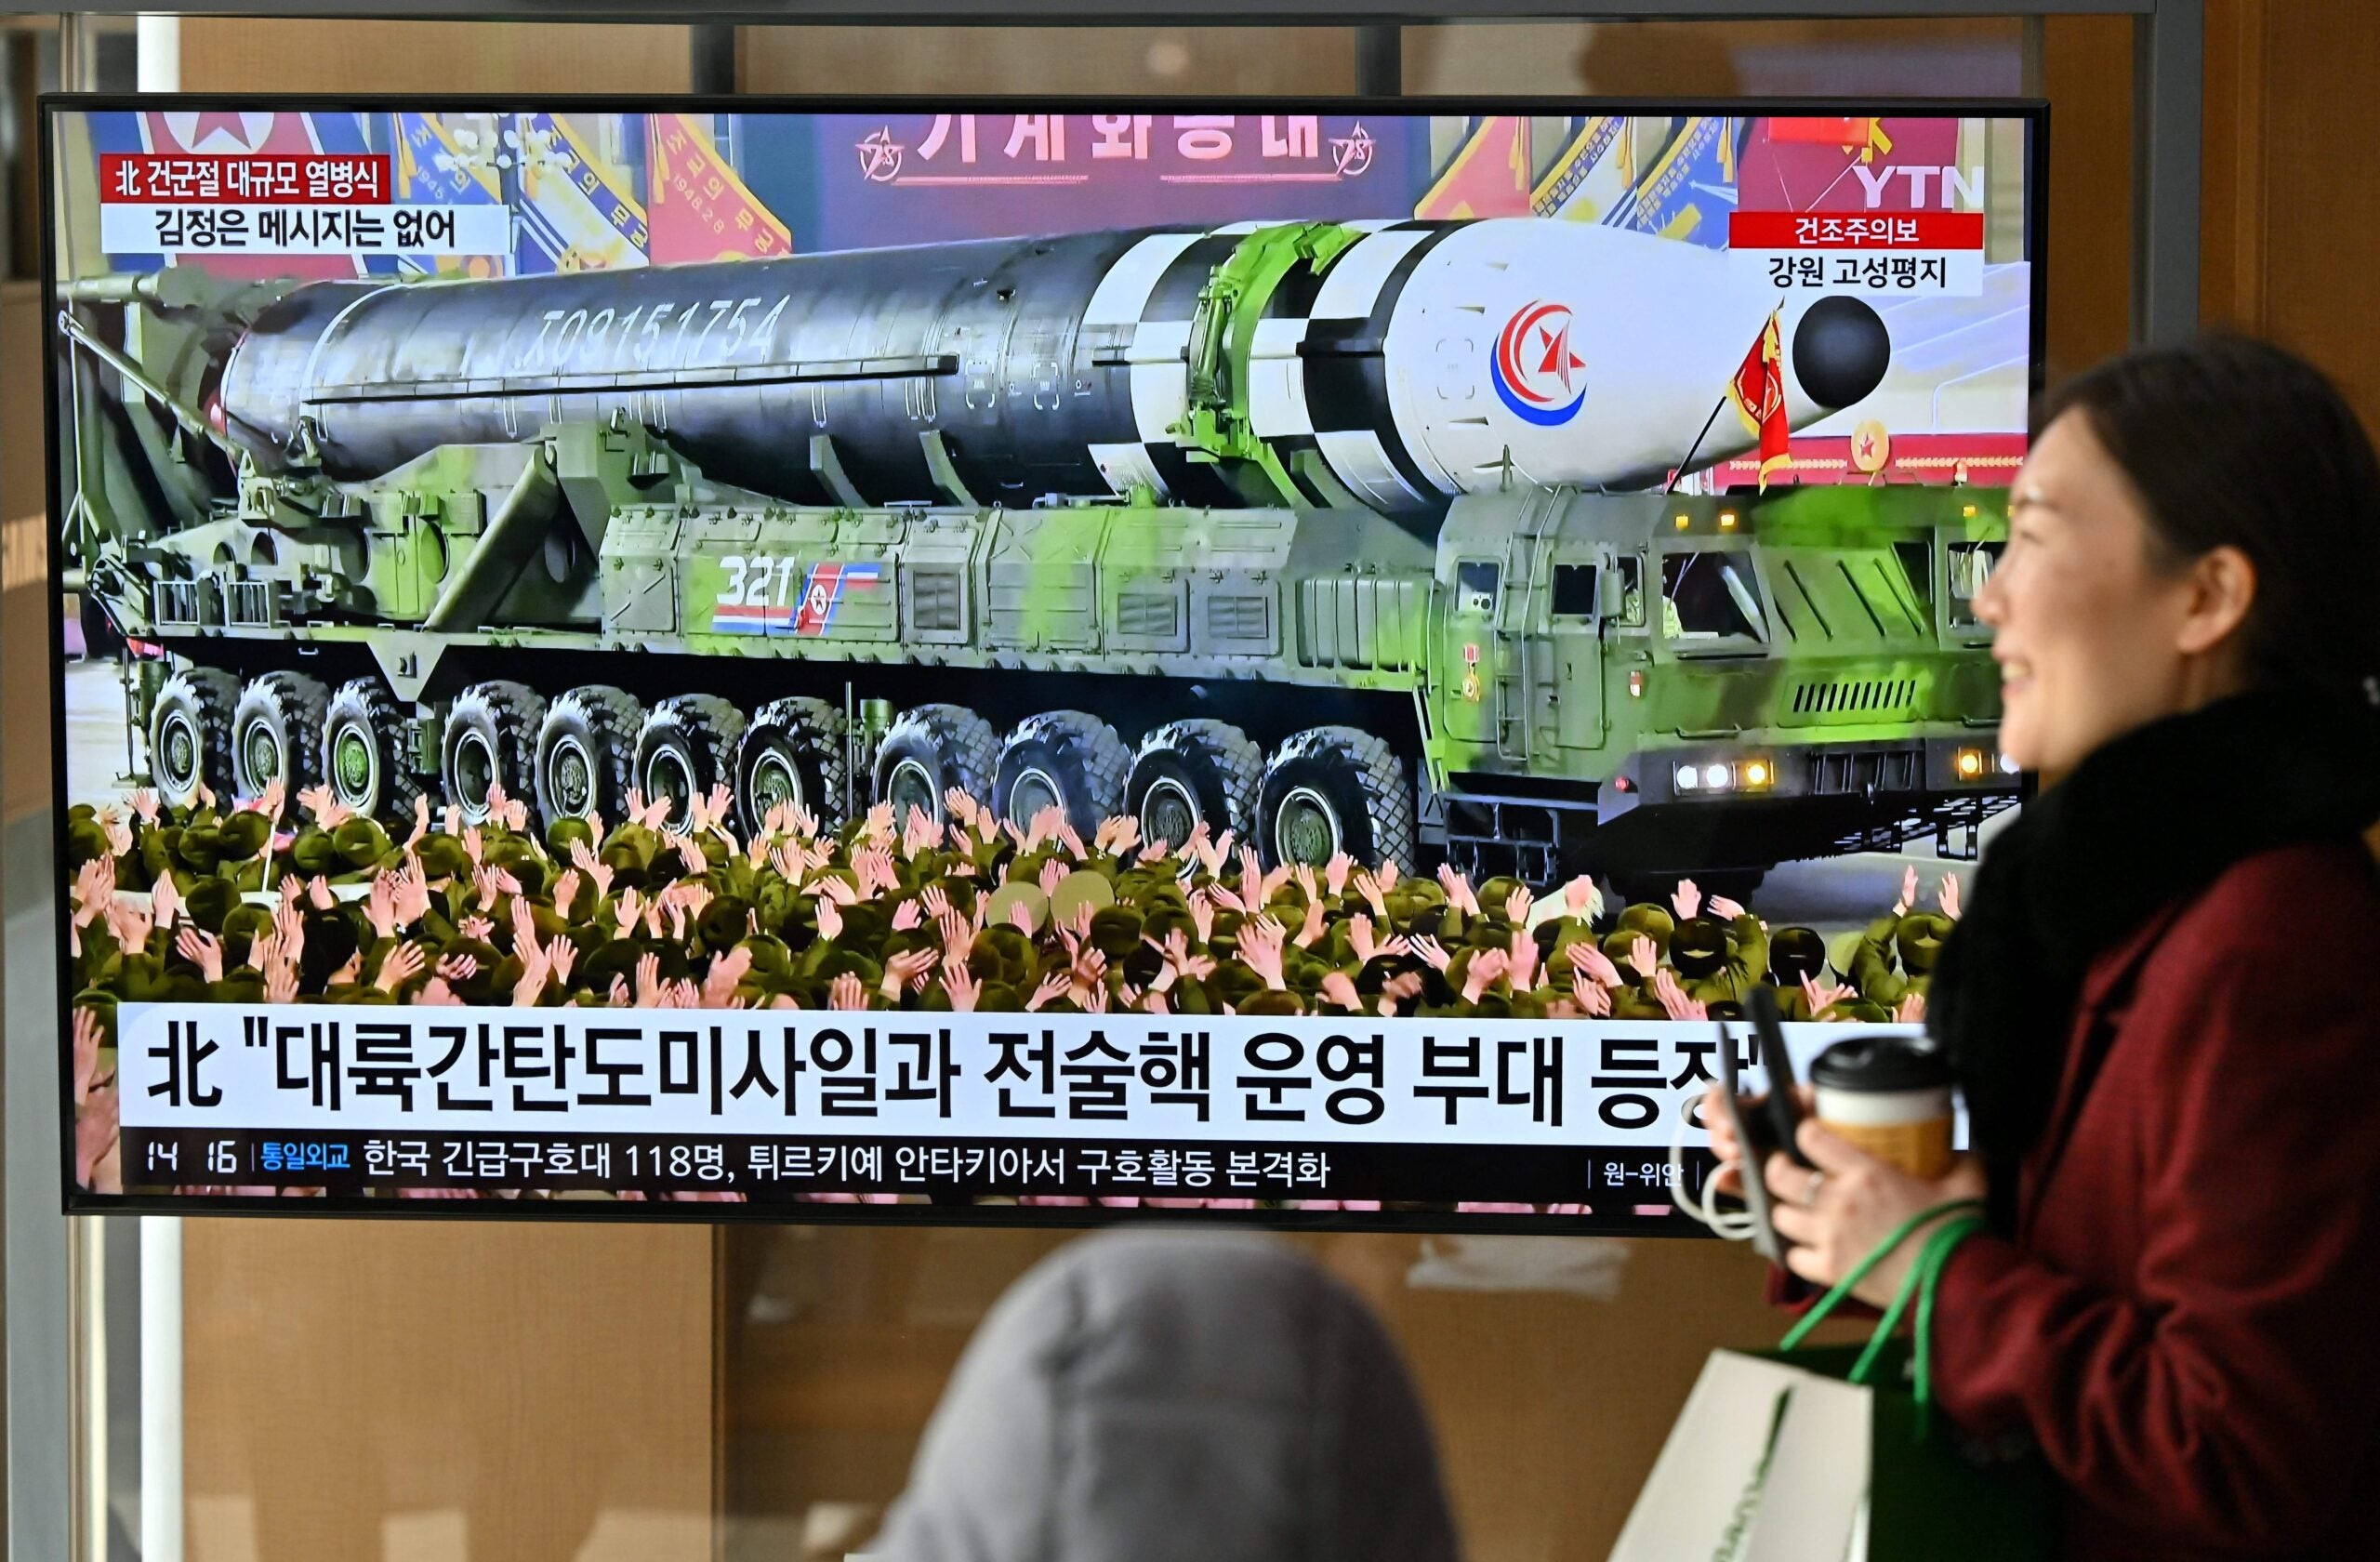 A woman walks past a television screen showing a news broadcast with an image of a North Korean military parade held in Pyongyang to mark the 75th founding anniversary of its armed forces, at a railway station in Seoul on February 9, 2023. - North Korea's Kim Jong Un oversaw a major military parade showcasing a record number of nuclear and intercontinental ballistic missiles, state media reported on February 9, including what analysts said was possibly a new solid-fueled ICBM. (Photo by Jung Yeon-je / AFP) (Photo by JUNG YEON-JE/AFP via Getty Images)